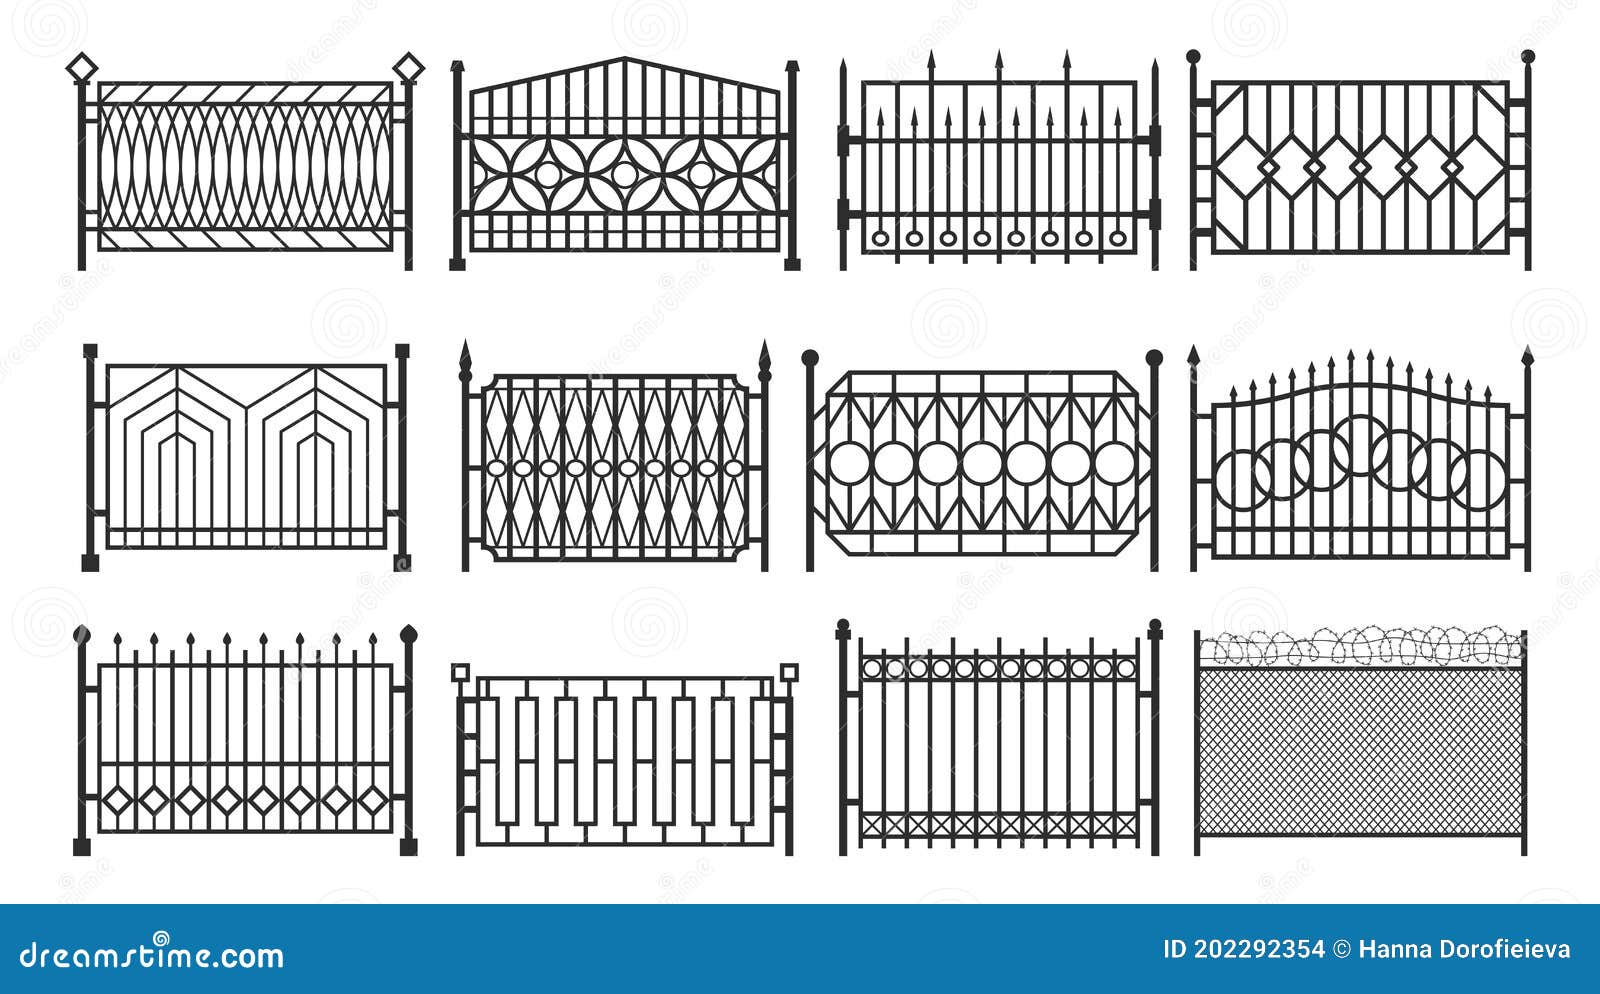 Fence, Metal Gates, Iron Steel Barriers, Fencing Stock Vector ...